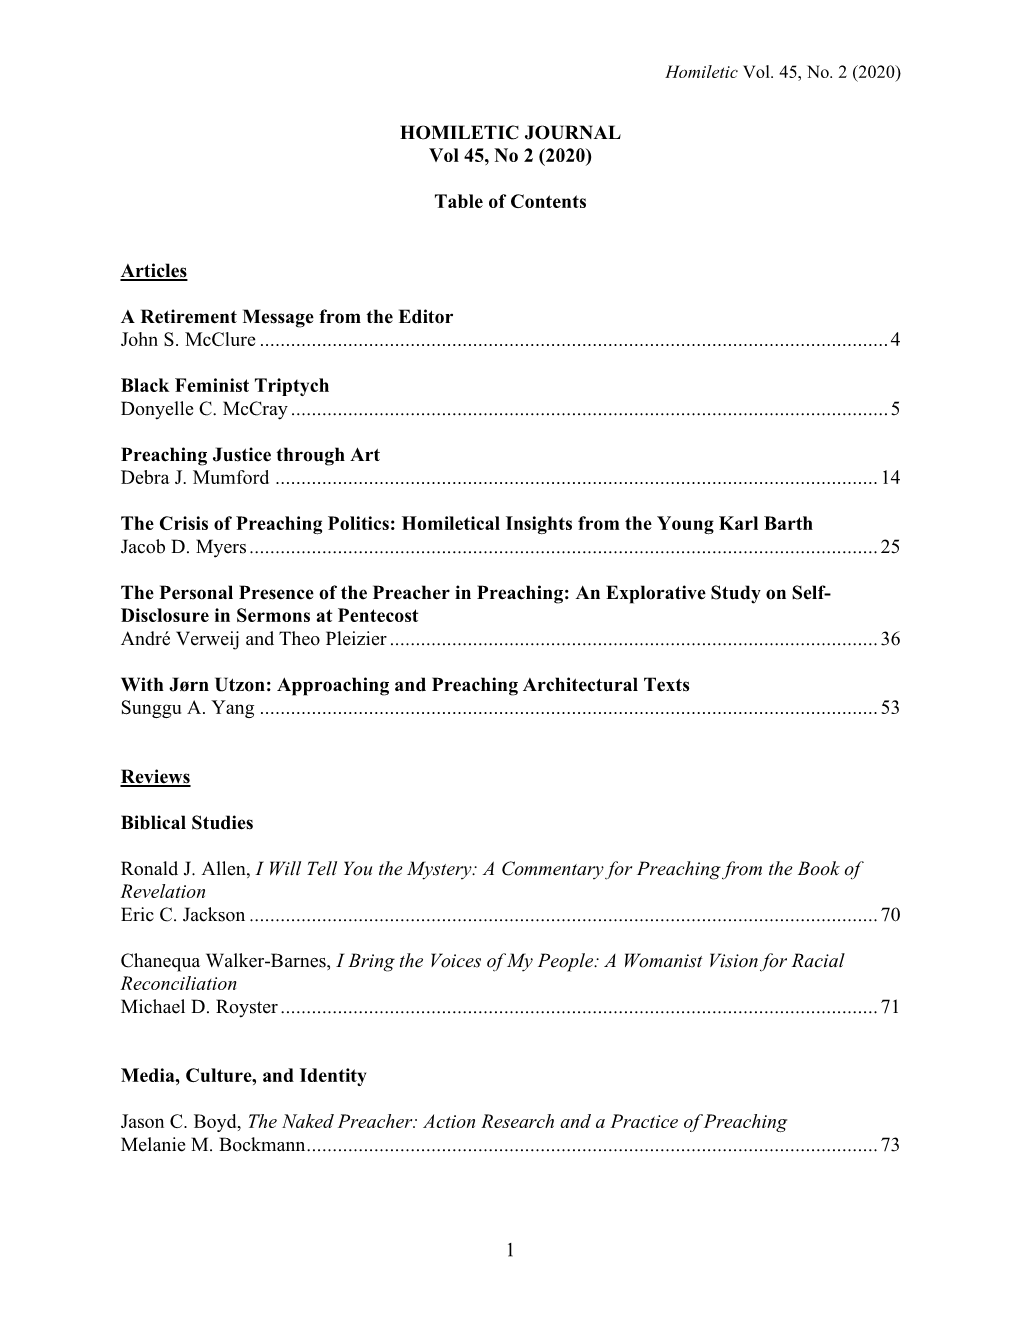 1 HOMILETIC JOURNAL Vol 45, No 2 (2020) Table of Contents Articles A